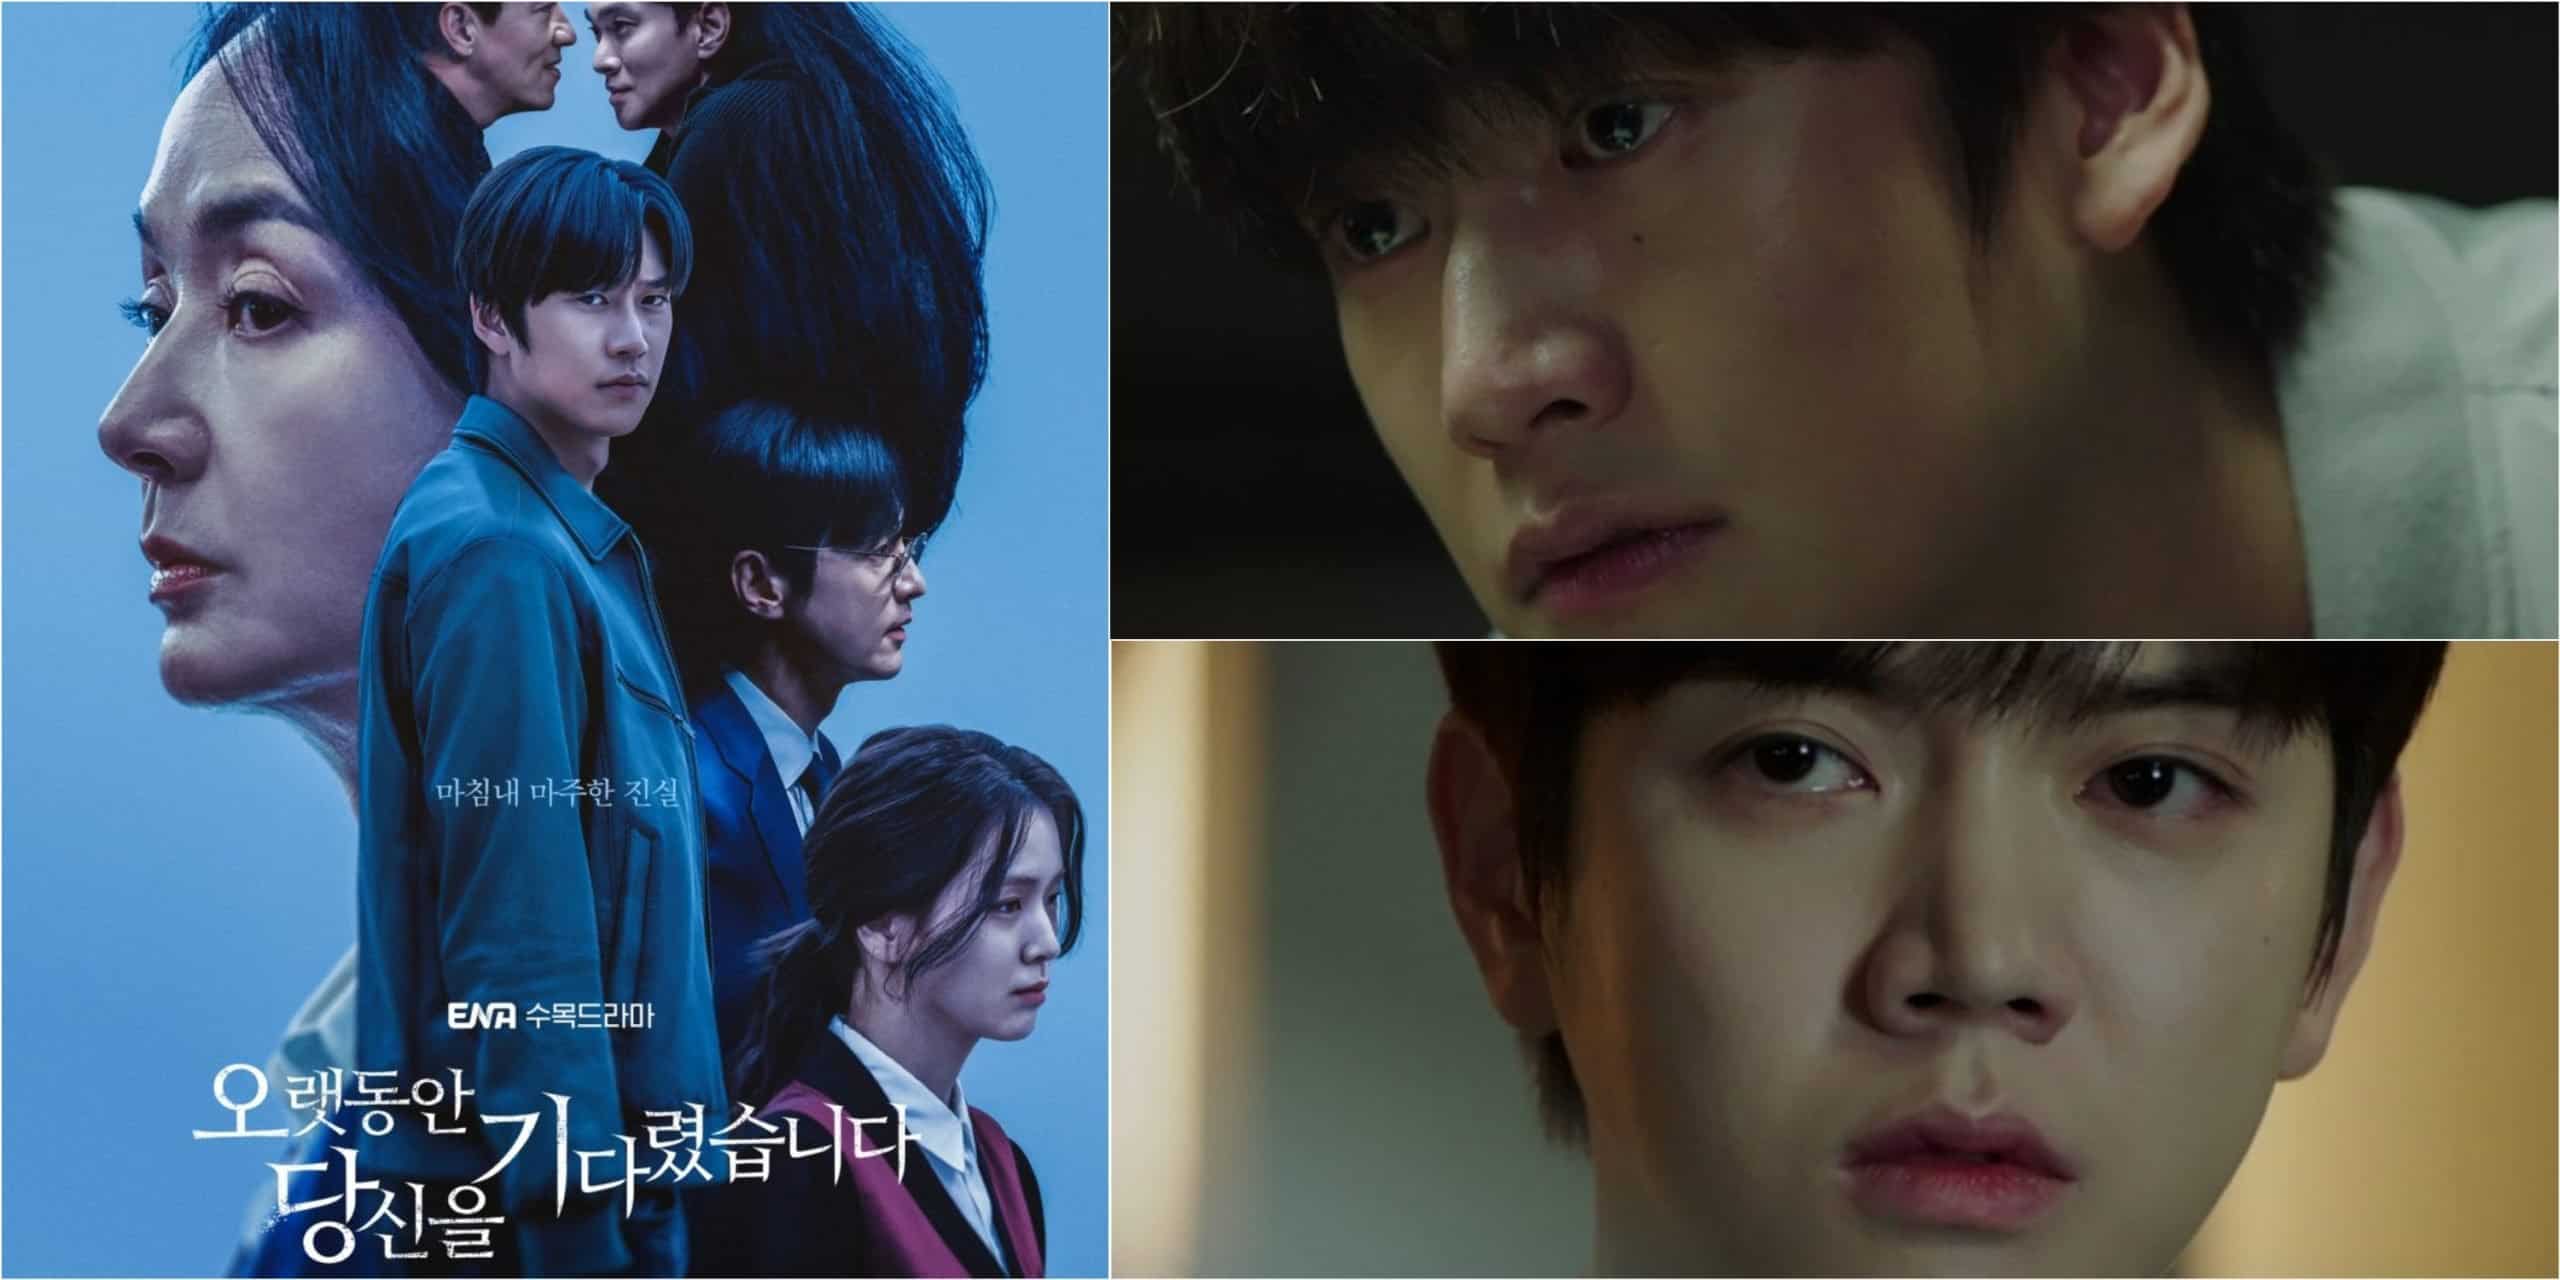 Korean Thriller Drama How to watch I Have Waited A Long Time For You Episodes? Streaming Guide and Episode Schedule